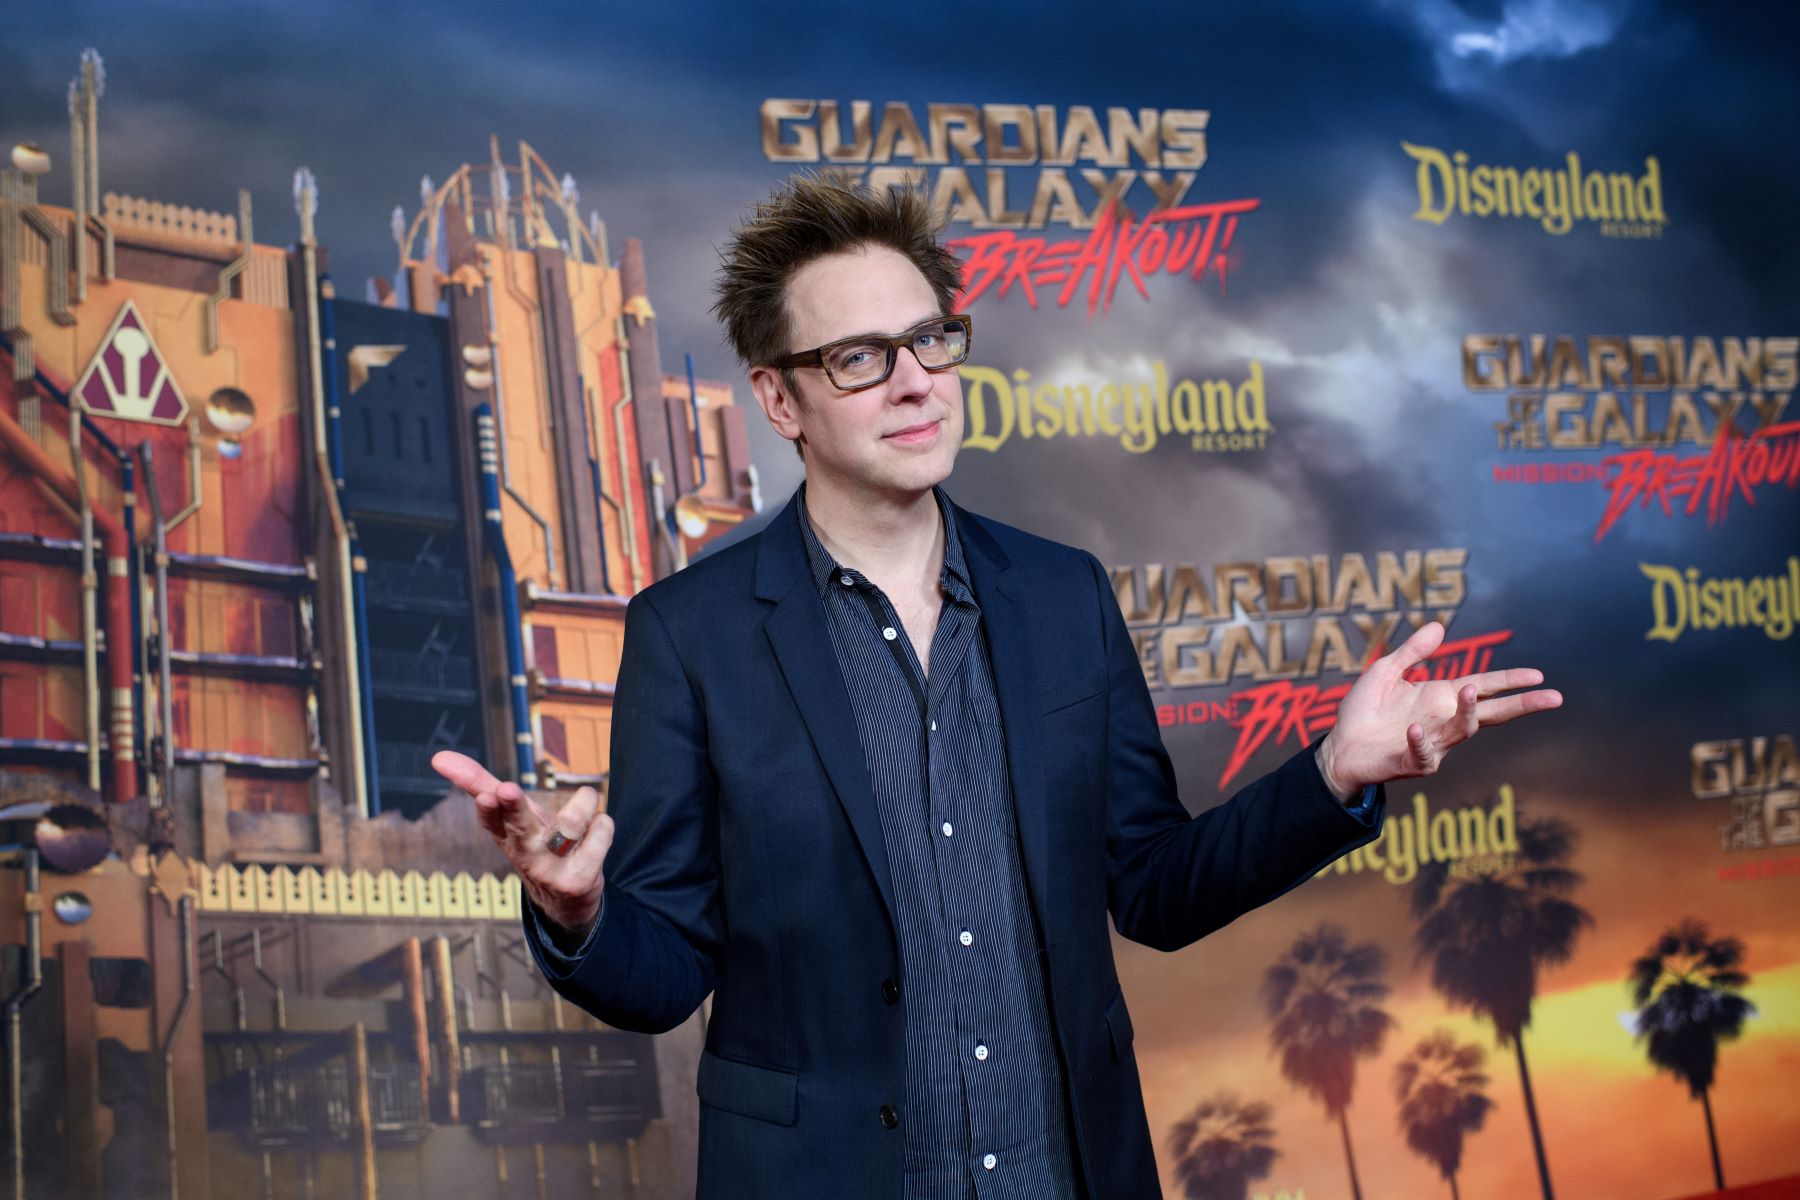 James Gunn, director of 'Guardians of the Galaxy' films, wears a casual suit and a pair of glasses at the opening of a ride at Disneyland.